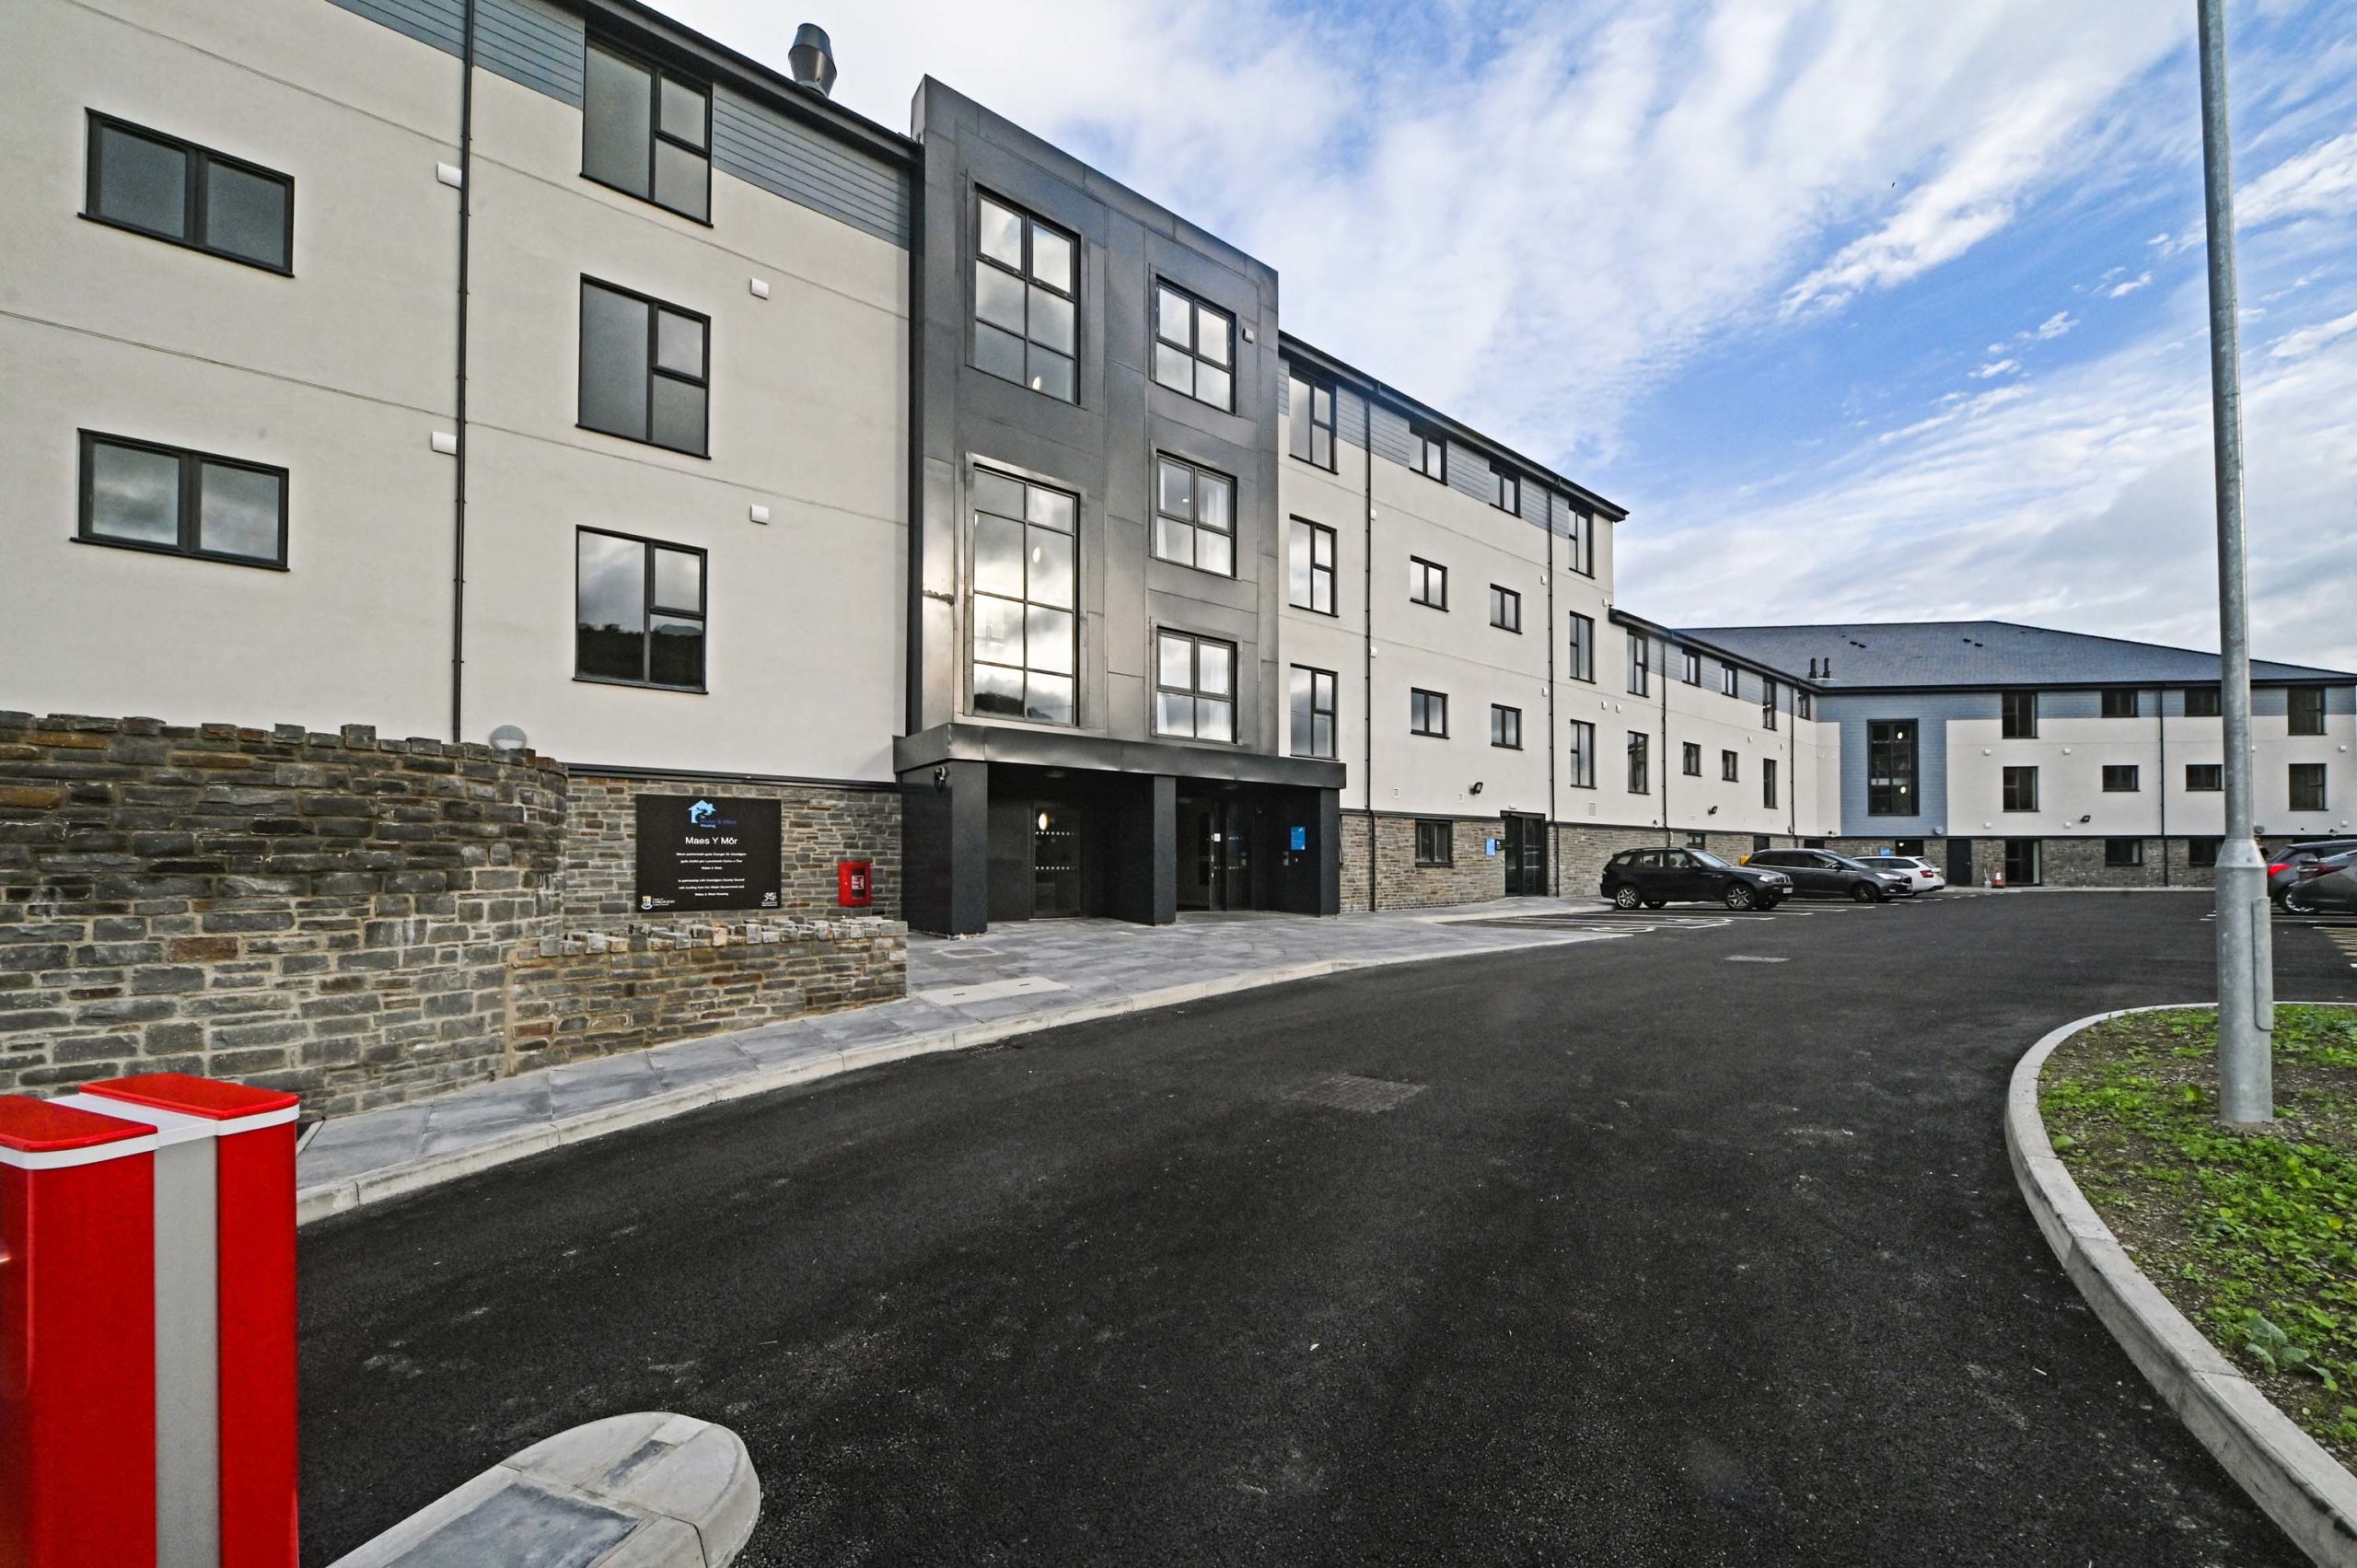 WWH Extra Care Scheme Maes Y Mor exterior view of front of building